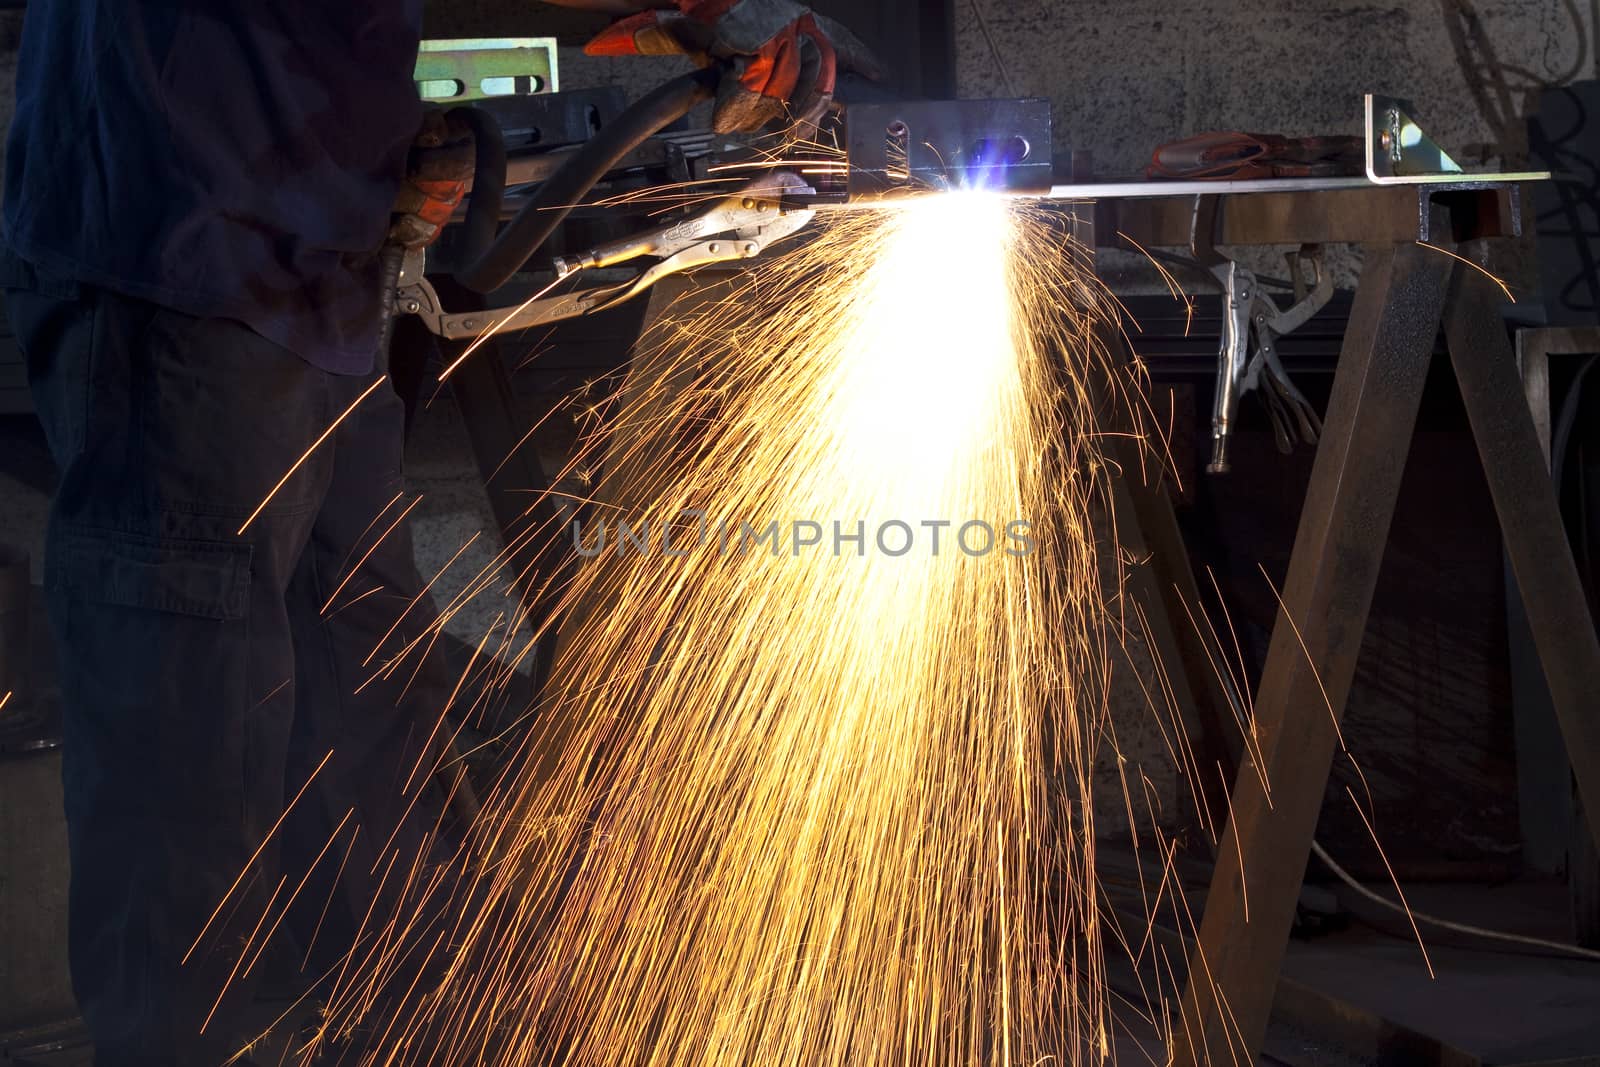 sparkes made while plasma cuting  steel plate